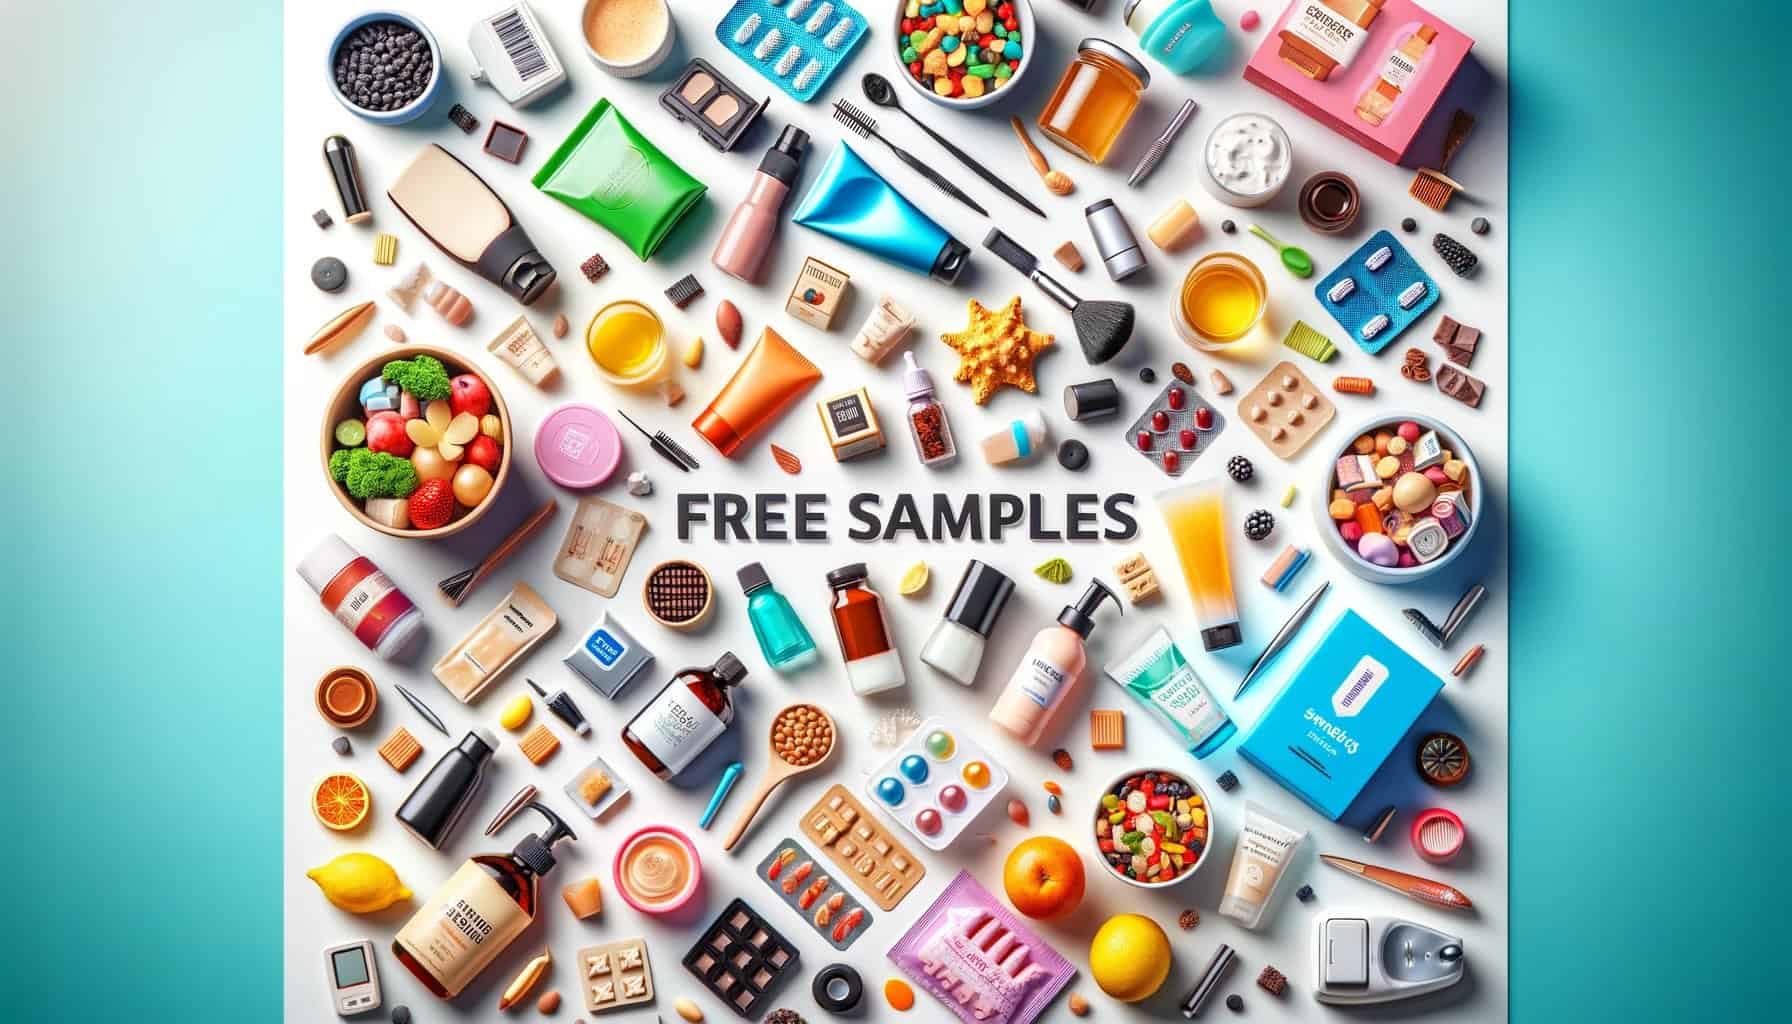 Free samples and giveaways